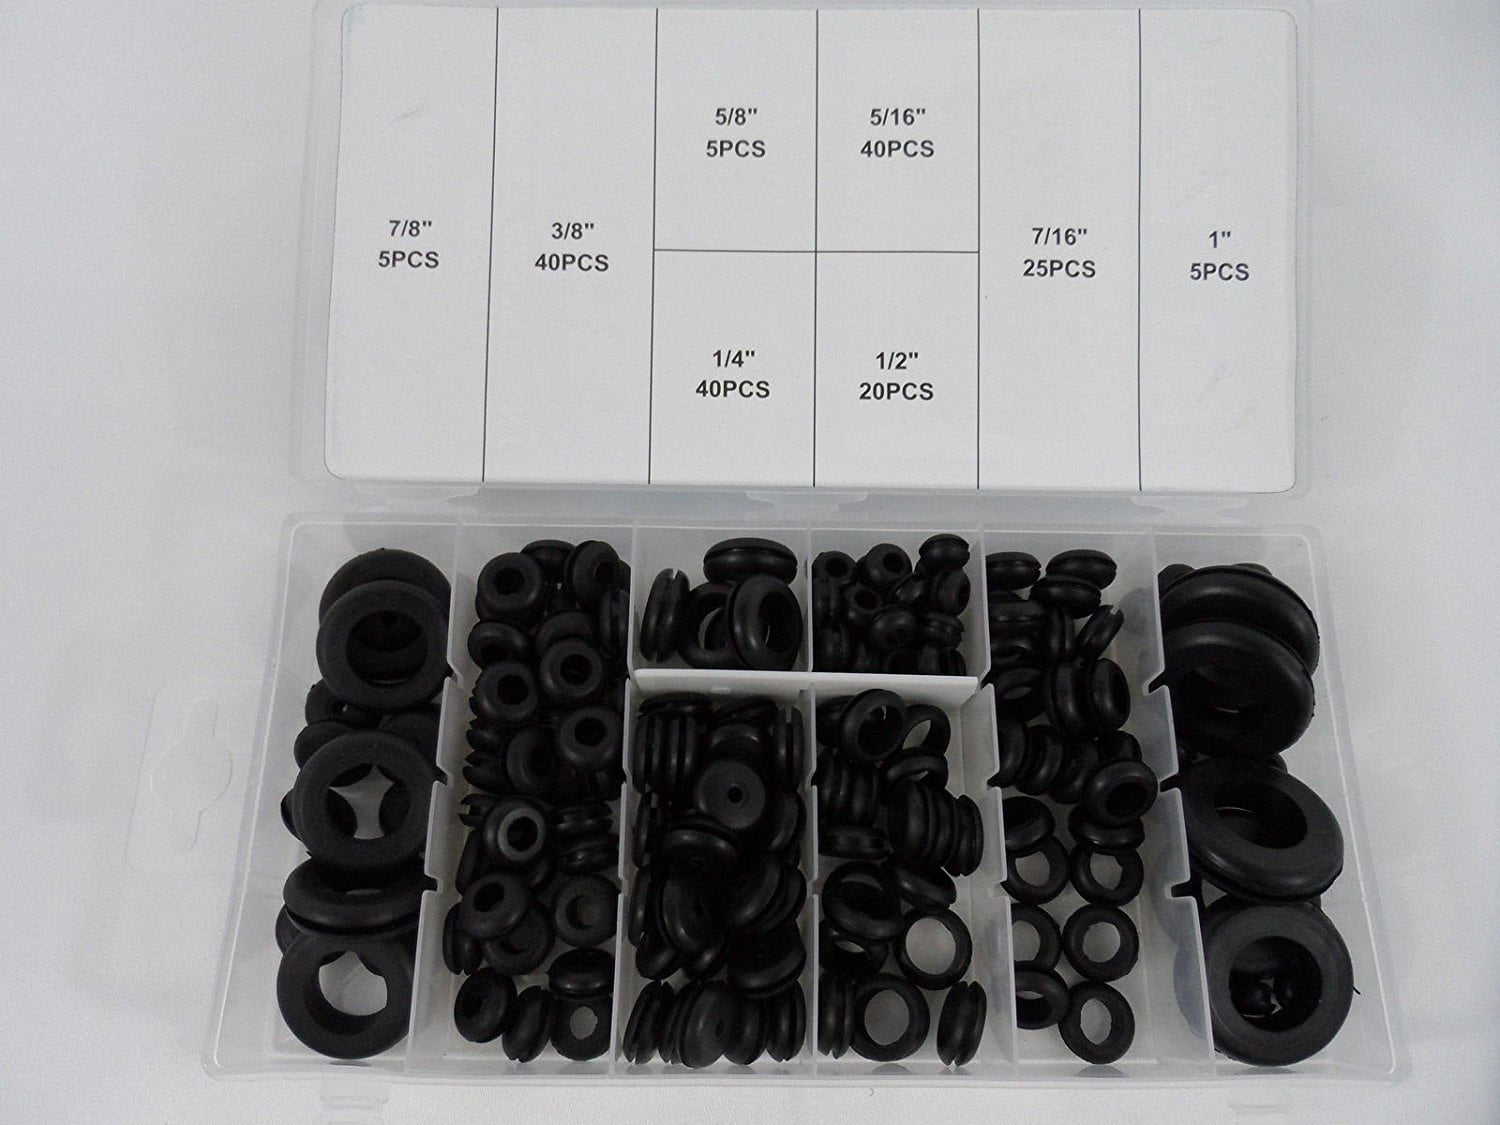 Mixed Sizes Small-Large Hole Protectors/Insulators 35Pc Rubber Grommet Set